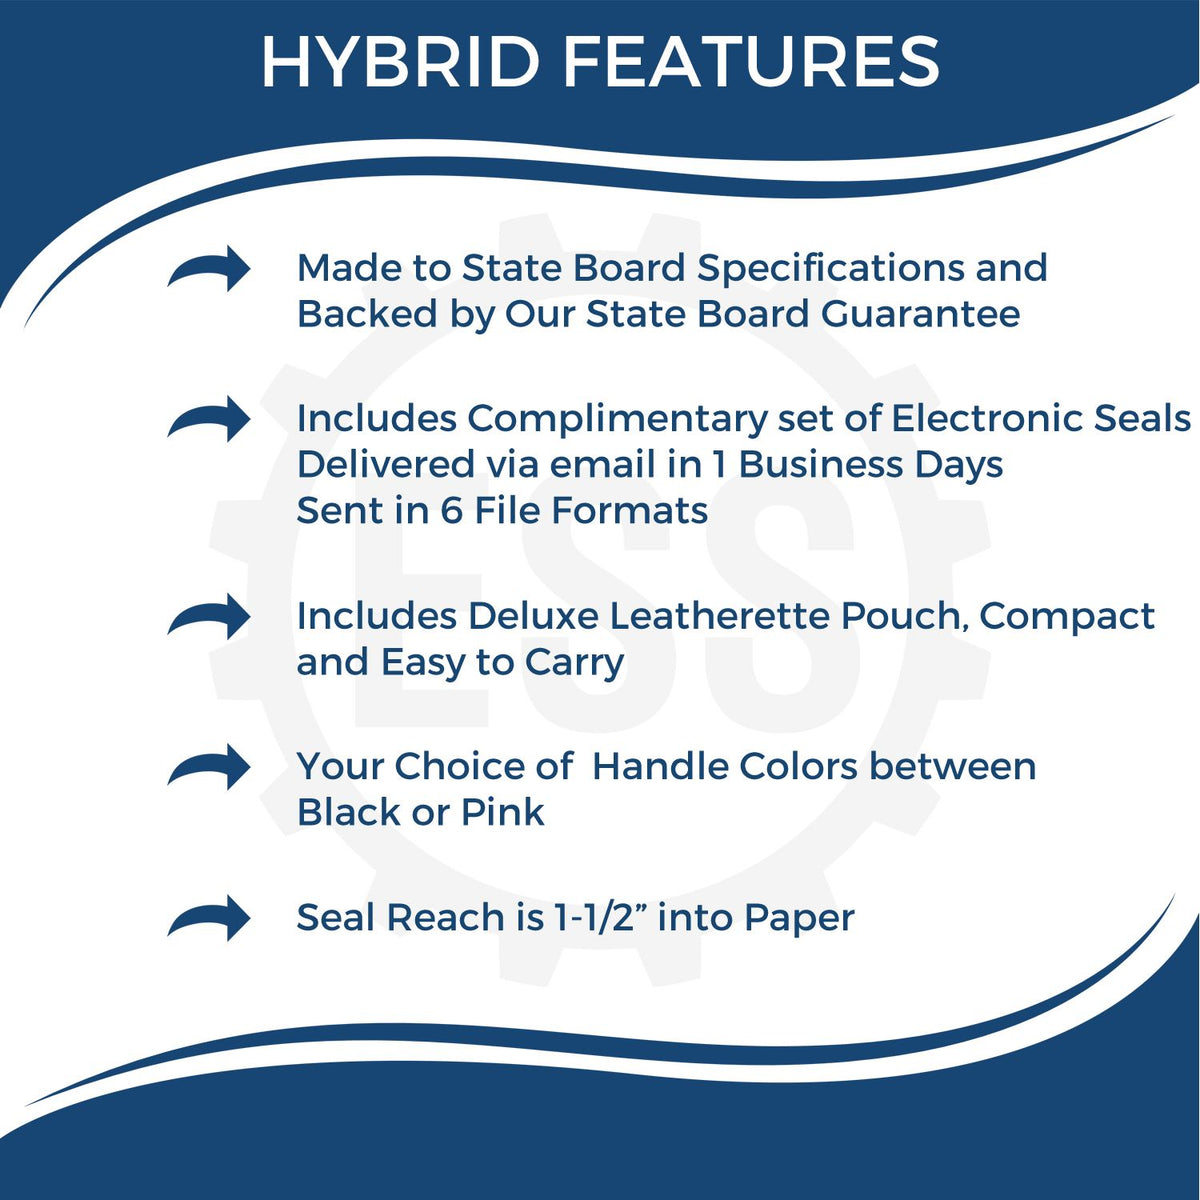 A picture of an infographic highlighting the selling points for the Hybrid Kentucky Architect Seal